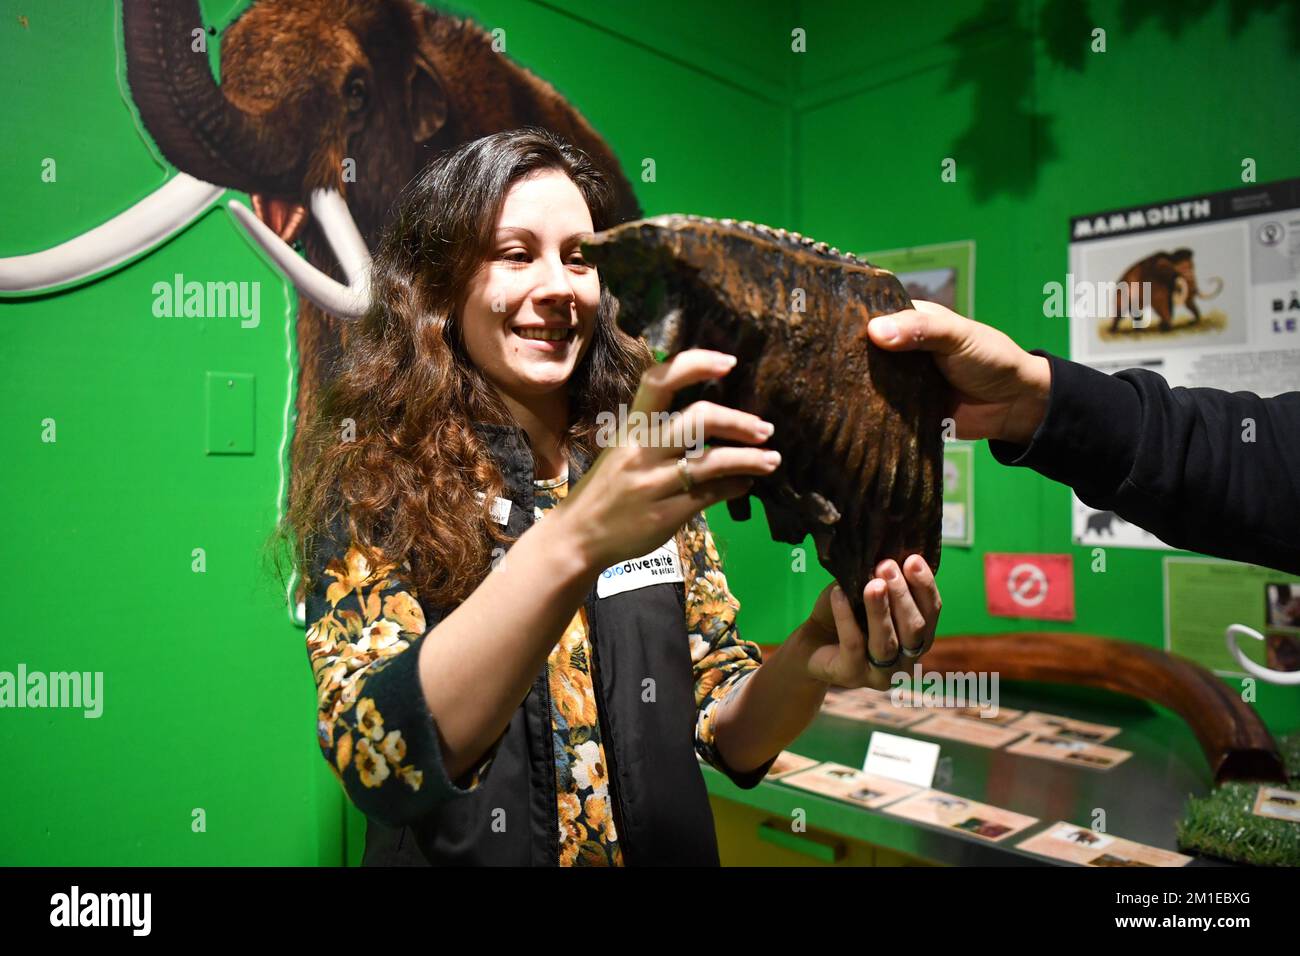 Becancour, Canada. 11th Dec, 2022. A staff member shows a duplicate of the mammoth's tooth at Quebec's Biodiversity Museum in Becancour, Canada, Dec. 11, 2022. Founded in 1997, Quebec's Biodiversity Museum is situated in Becancour, 150 km from Montreal, Canada. The second phase of the 15th meeting of the Conference of the Parties to the UN Convention on Biological Diversity (COP15) is held from Dec. 7 to 19 in Montreal, Canada's Quebec province. Credit: Lian Yi/Xinhua/Alamy Live News Stock Photo